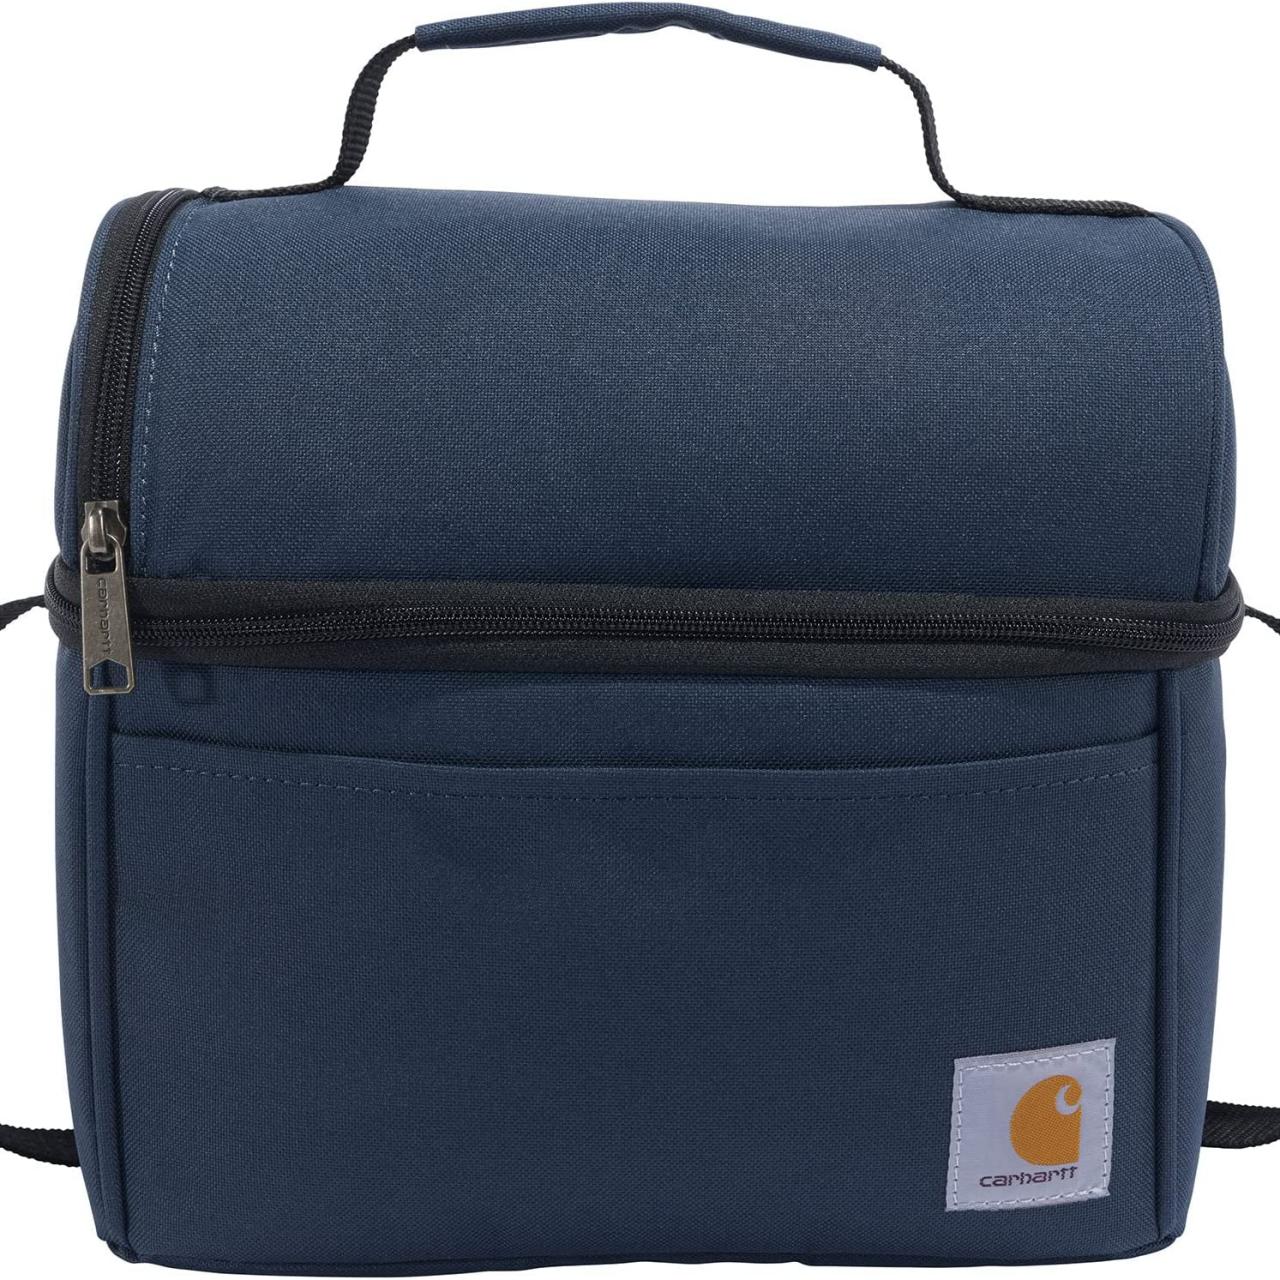 https://food.fnr.sndimg.com/content/dam/images/food/products/2022/7/21/rx_carhartt-dual-compartment-lunch-bag.jpeg.rend.hgtvcom.1280.1280.suffix/1658382767892.jpeg